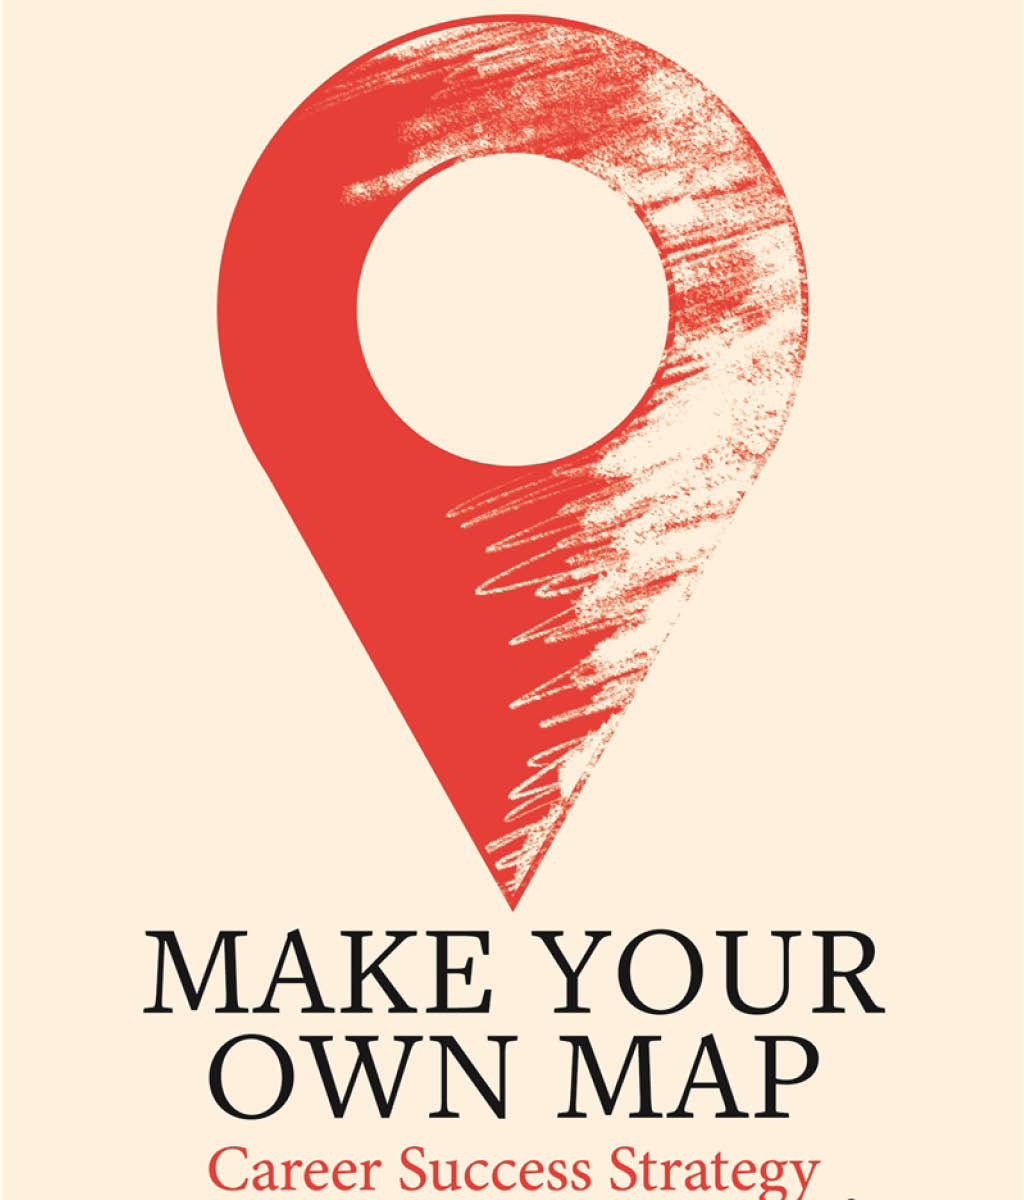 Make Your Own Map: Career Success Strategy for Women by Kathryn Bishop